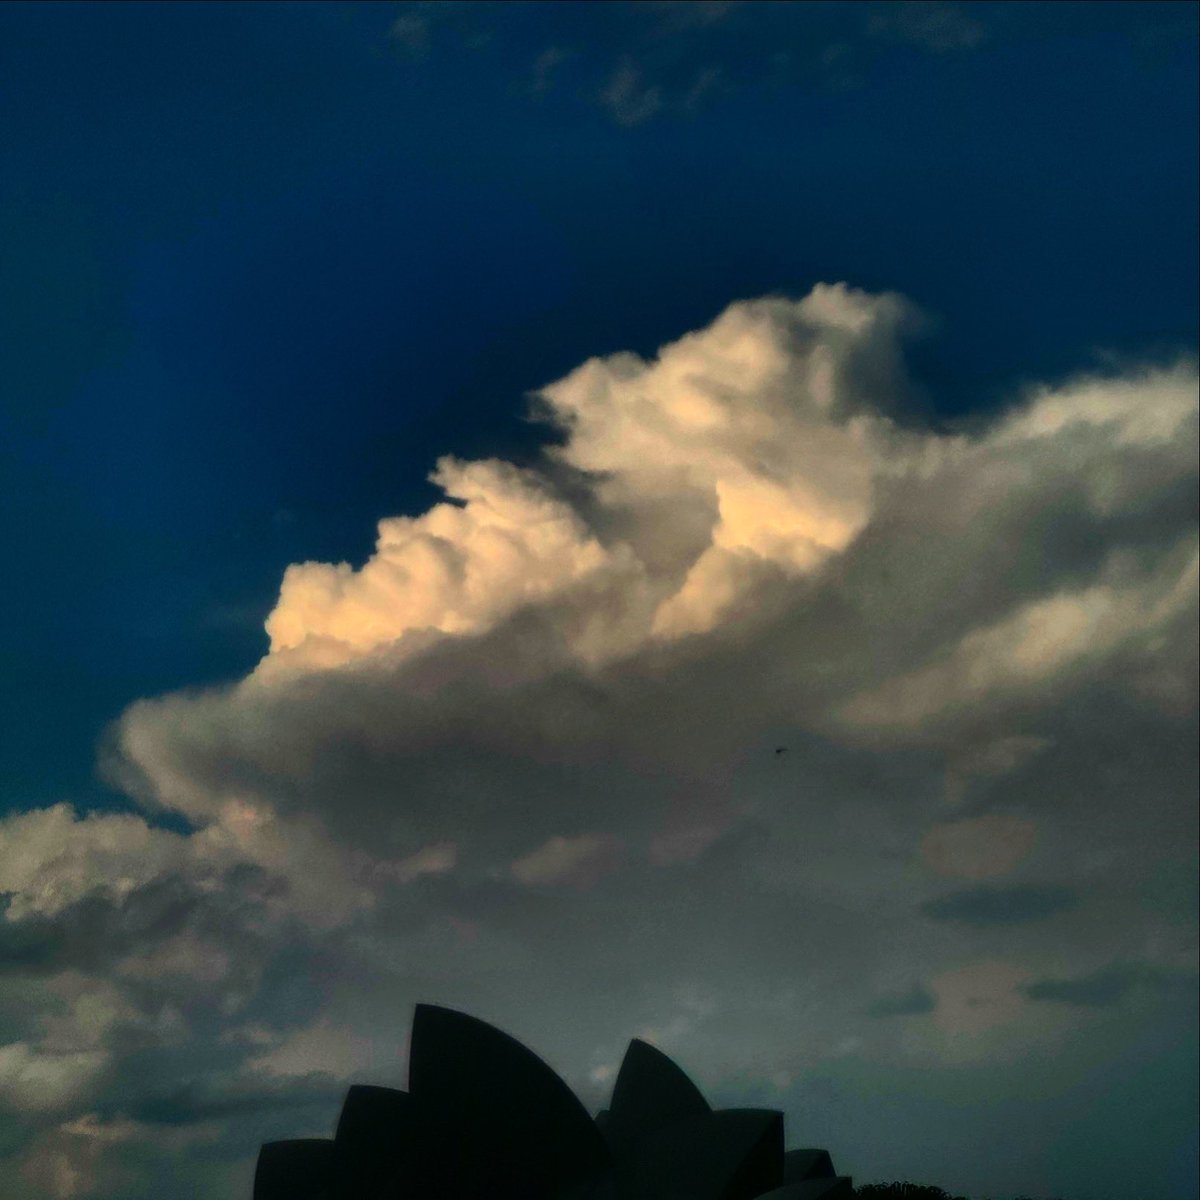 Storms comes, Storms goes #sydneystorms #sydneyoperahouse #storm #sydney #clouds